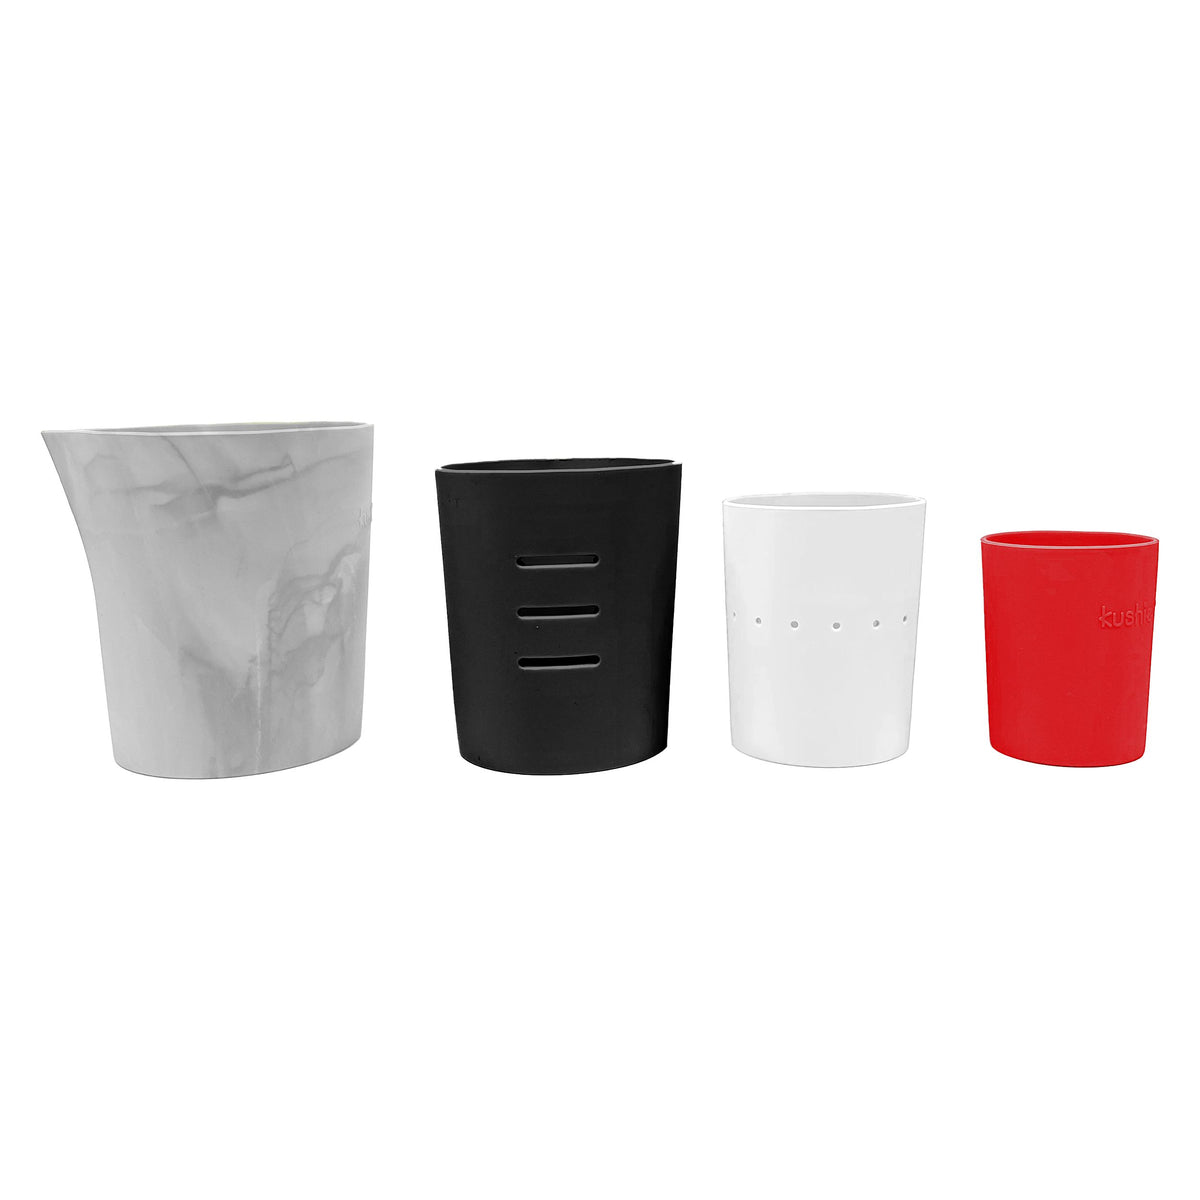 Silistack | Silicone Stacking Cups | Bath Toy Set